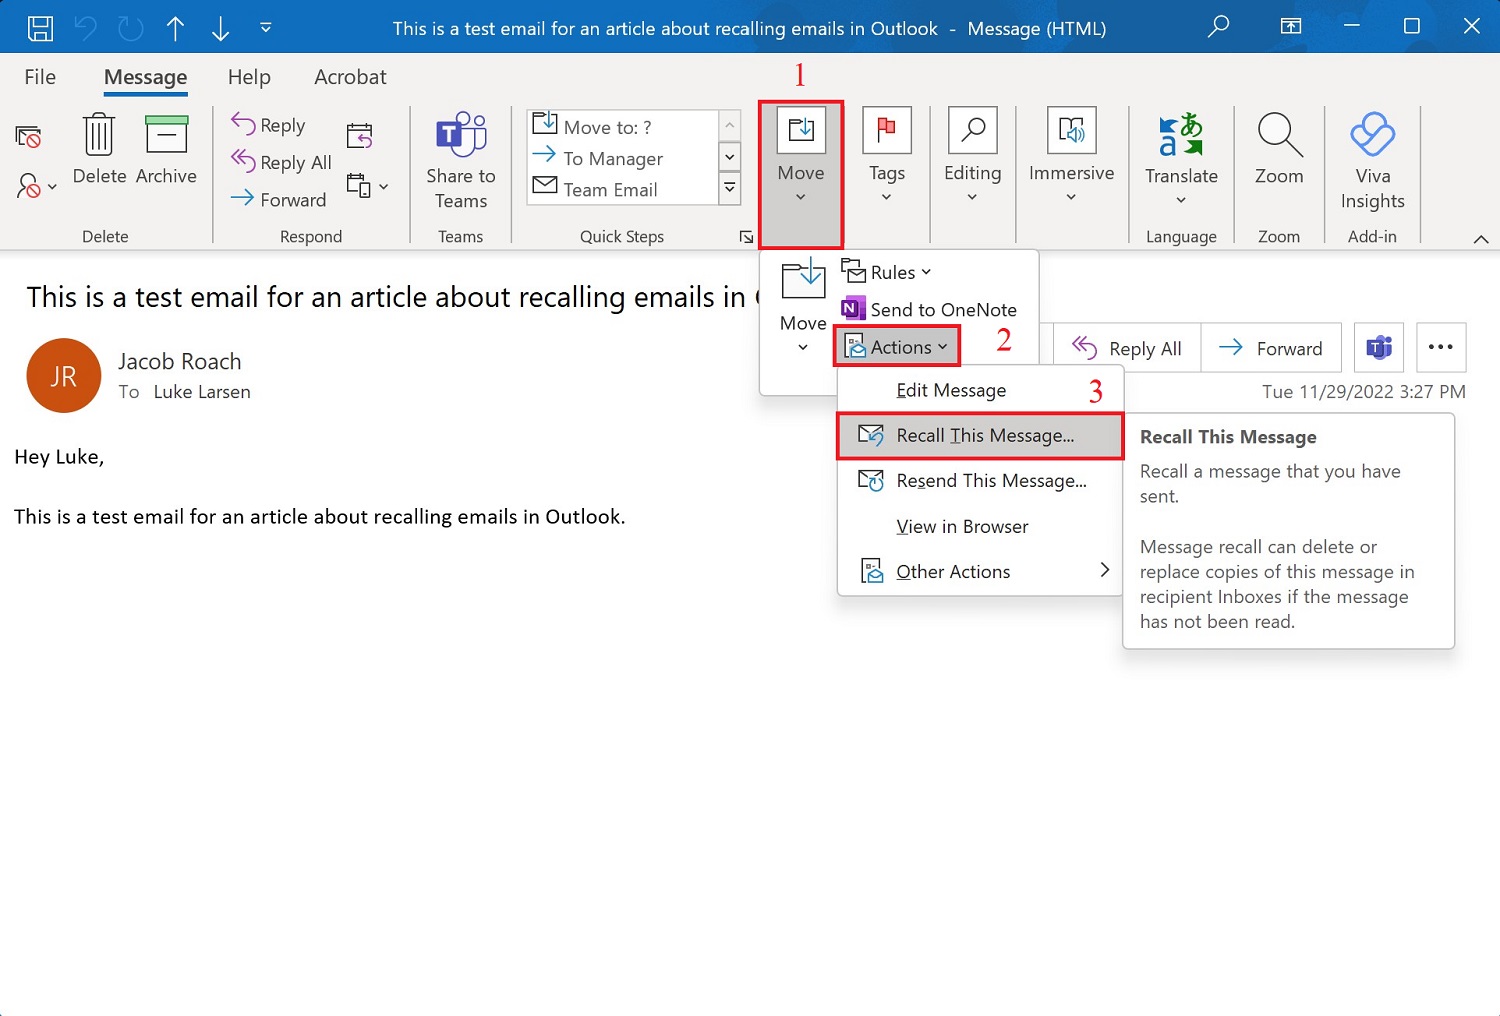 Recalling a message option in Outlook with expanded toolbar.